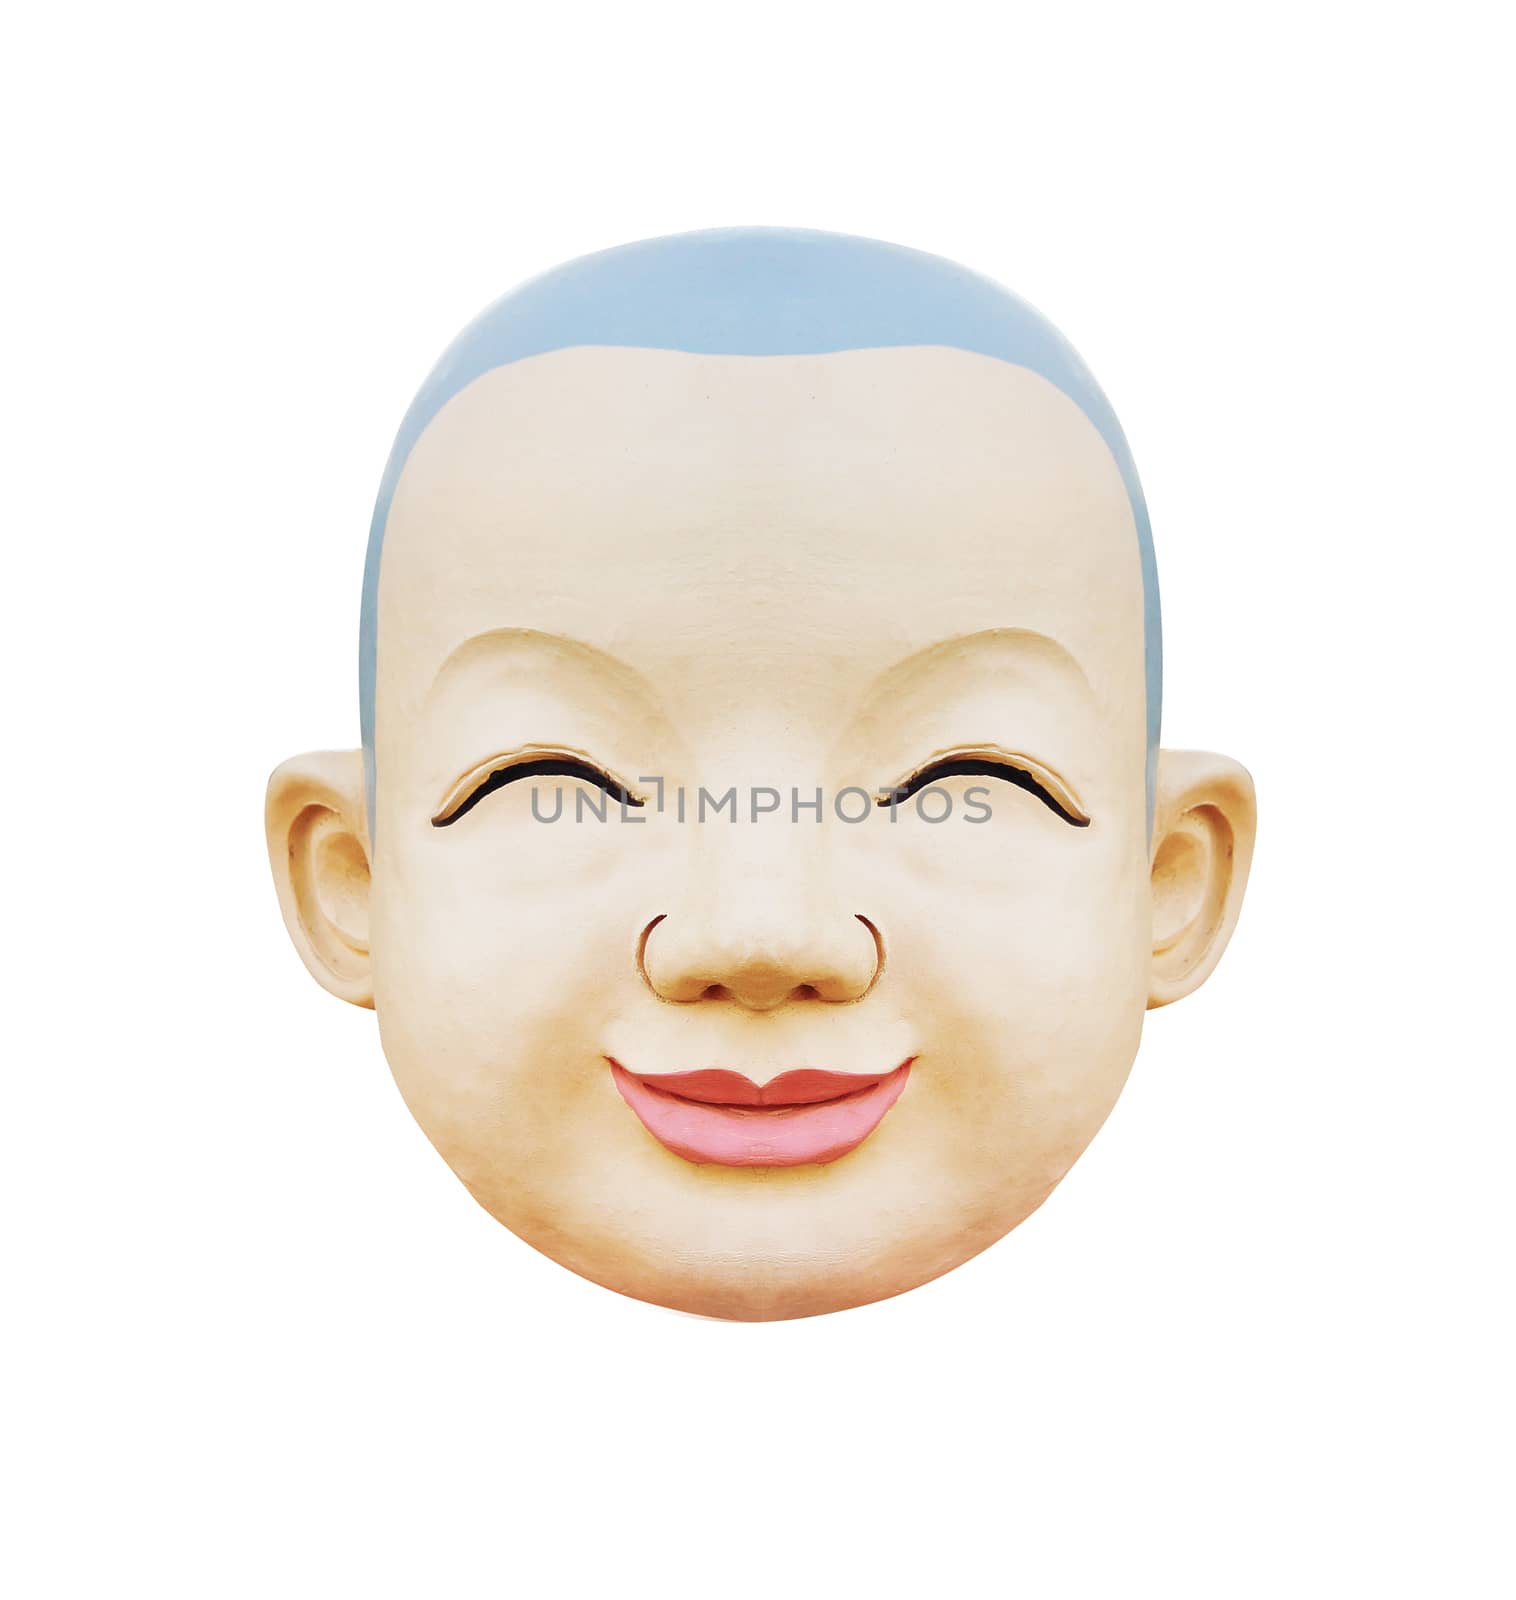 Smily of baby face statue to isolate with white background